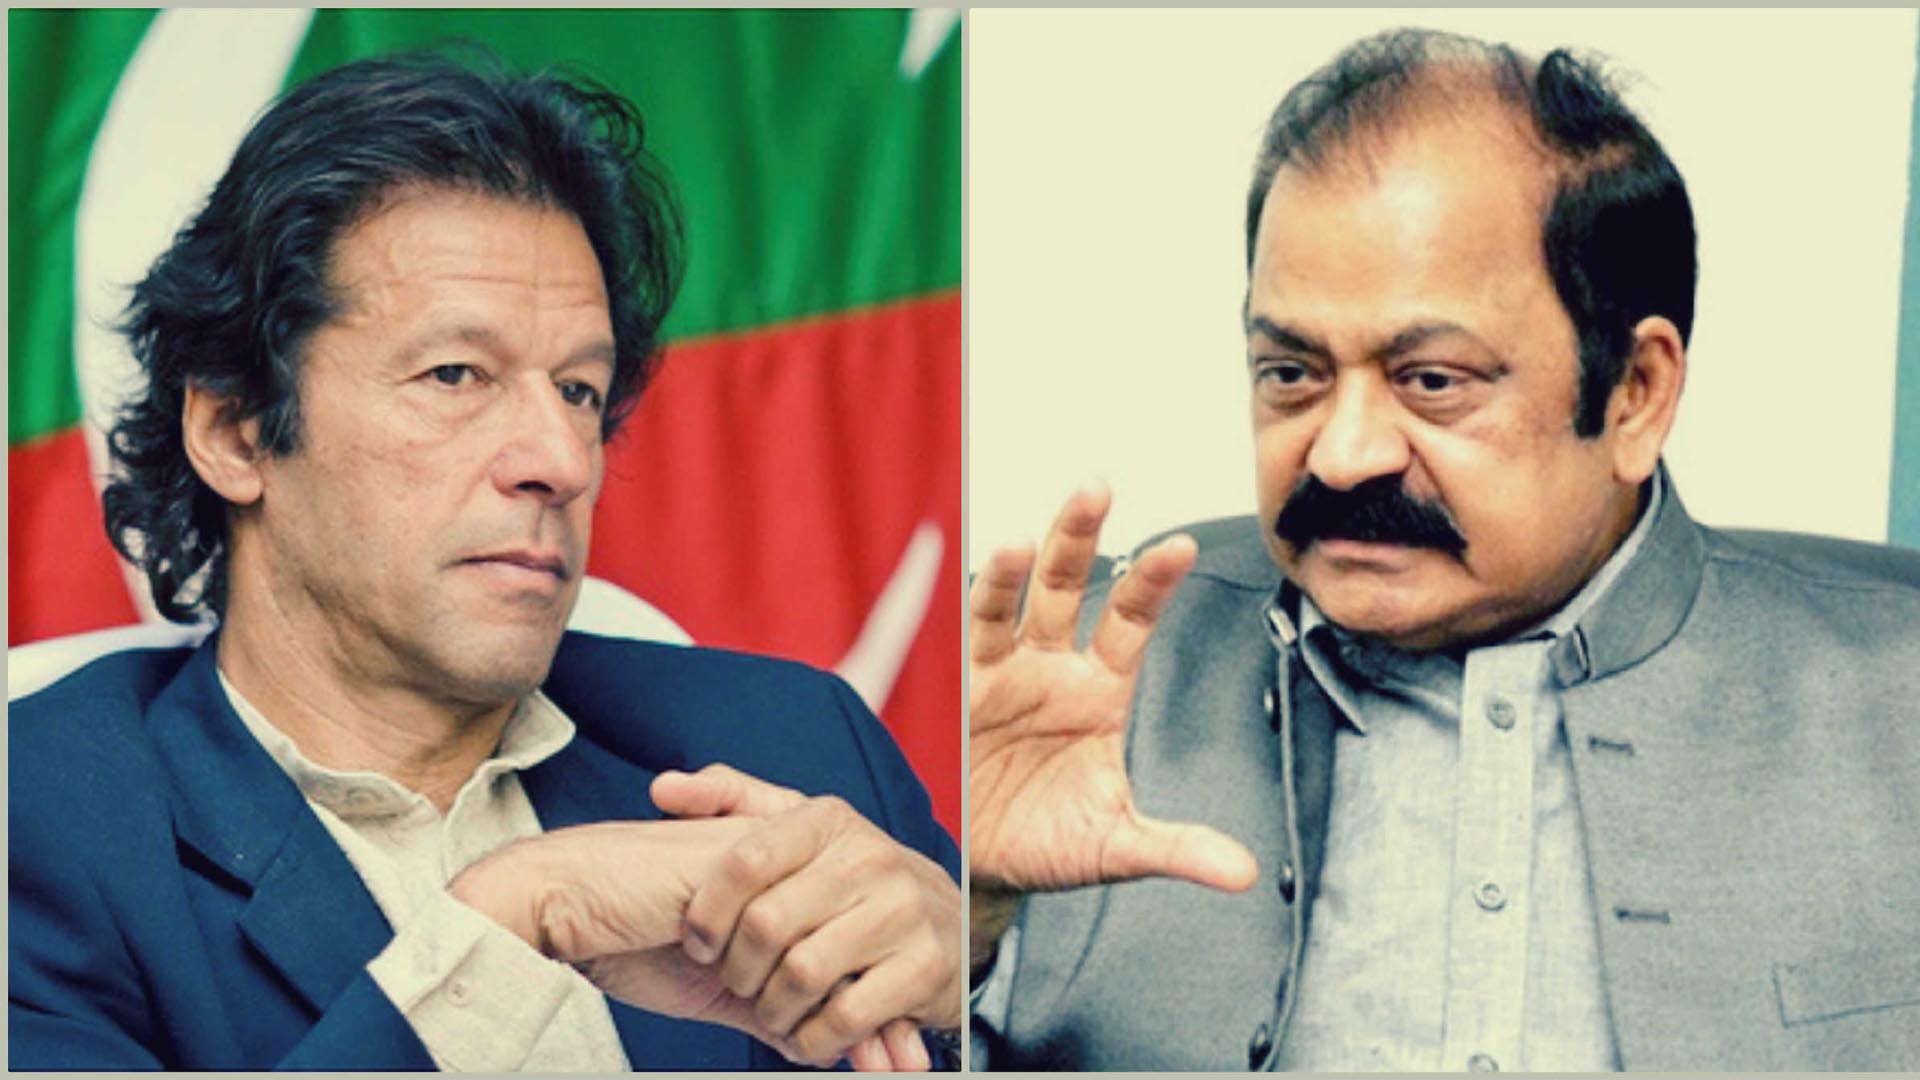 'Govt trying to preempt horror stories about to break': Imran Khan hits back at Rana Sanaullah